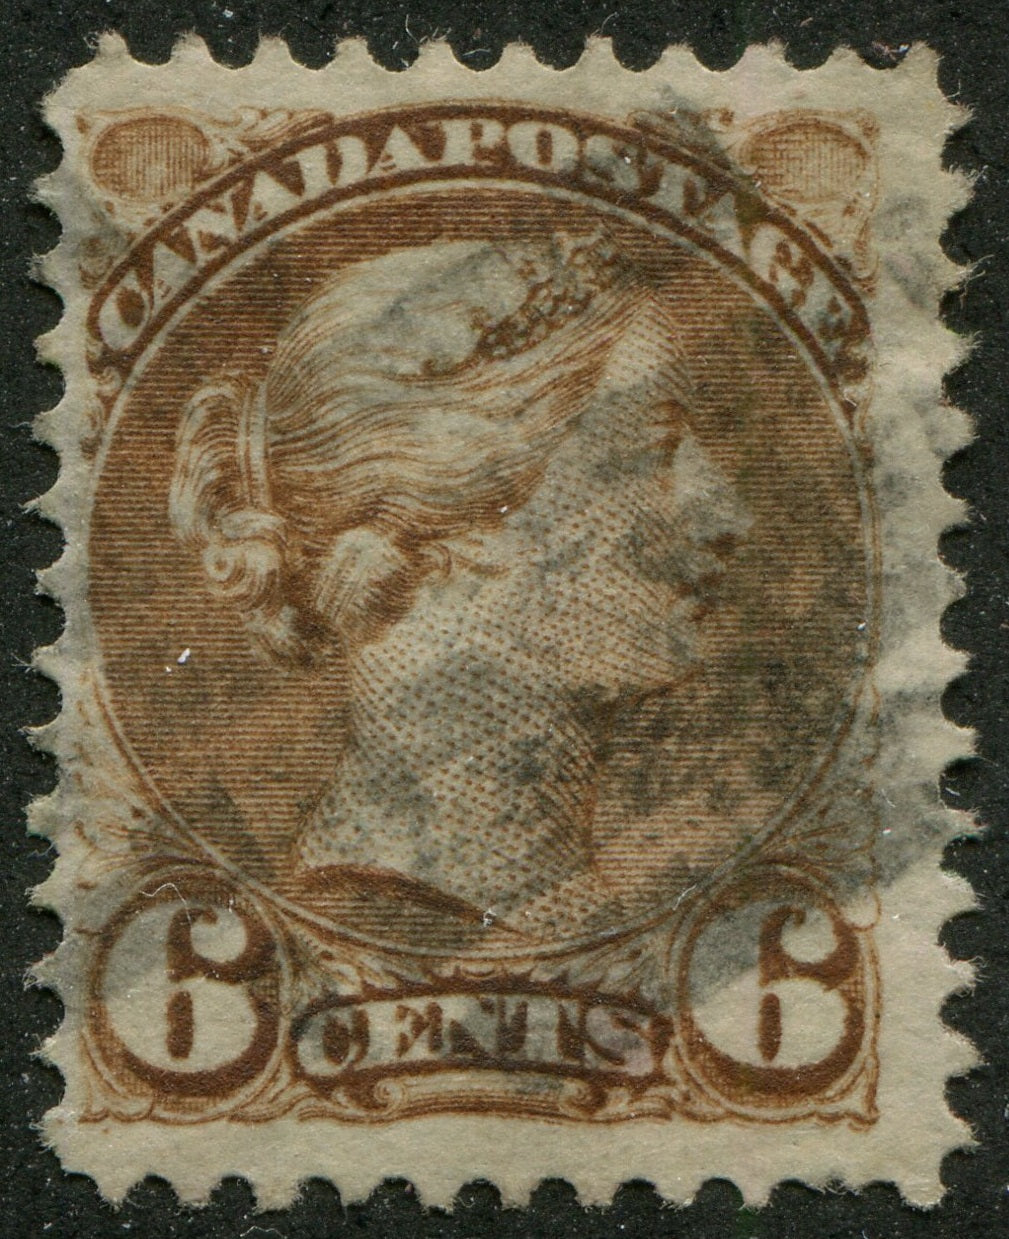 0039CA2301 - Canada #39 - Used Re-entry